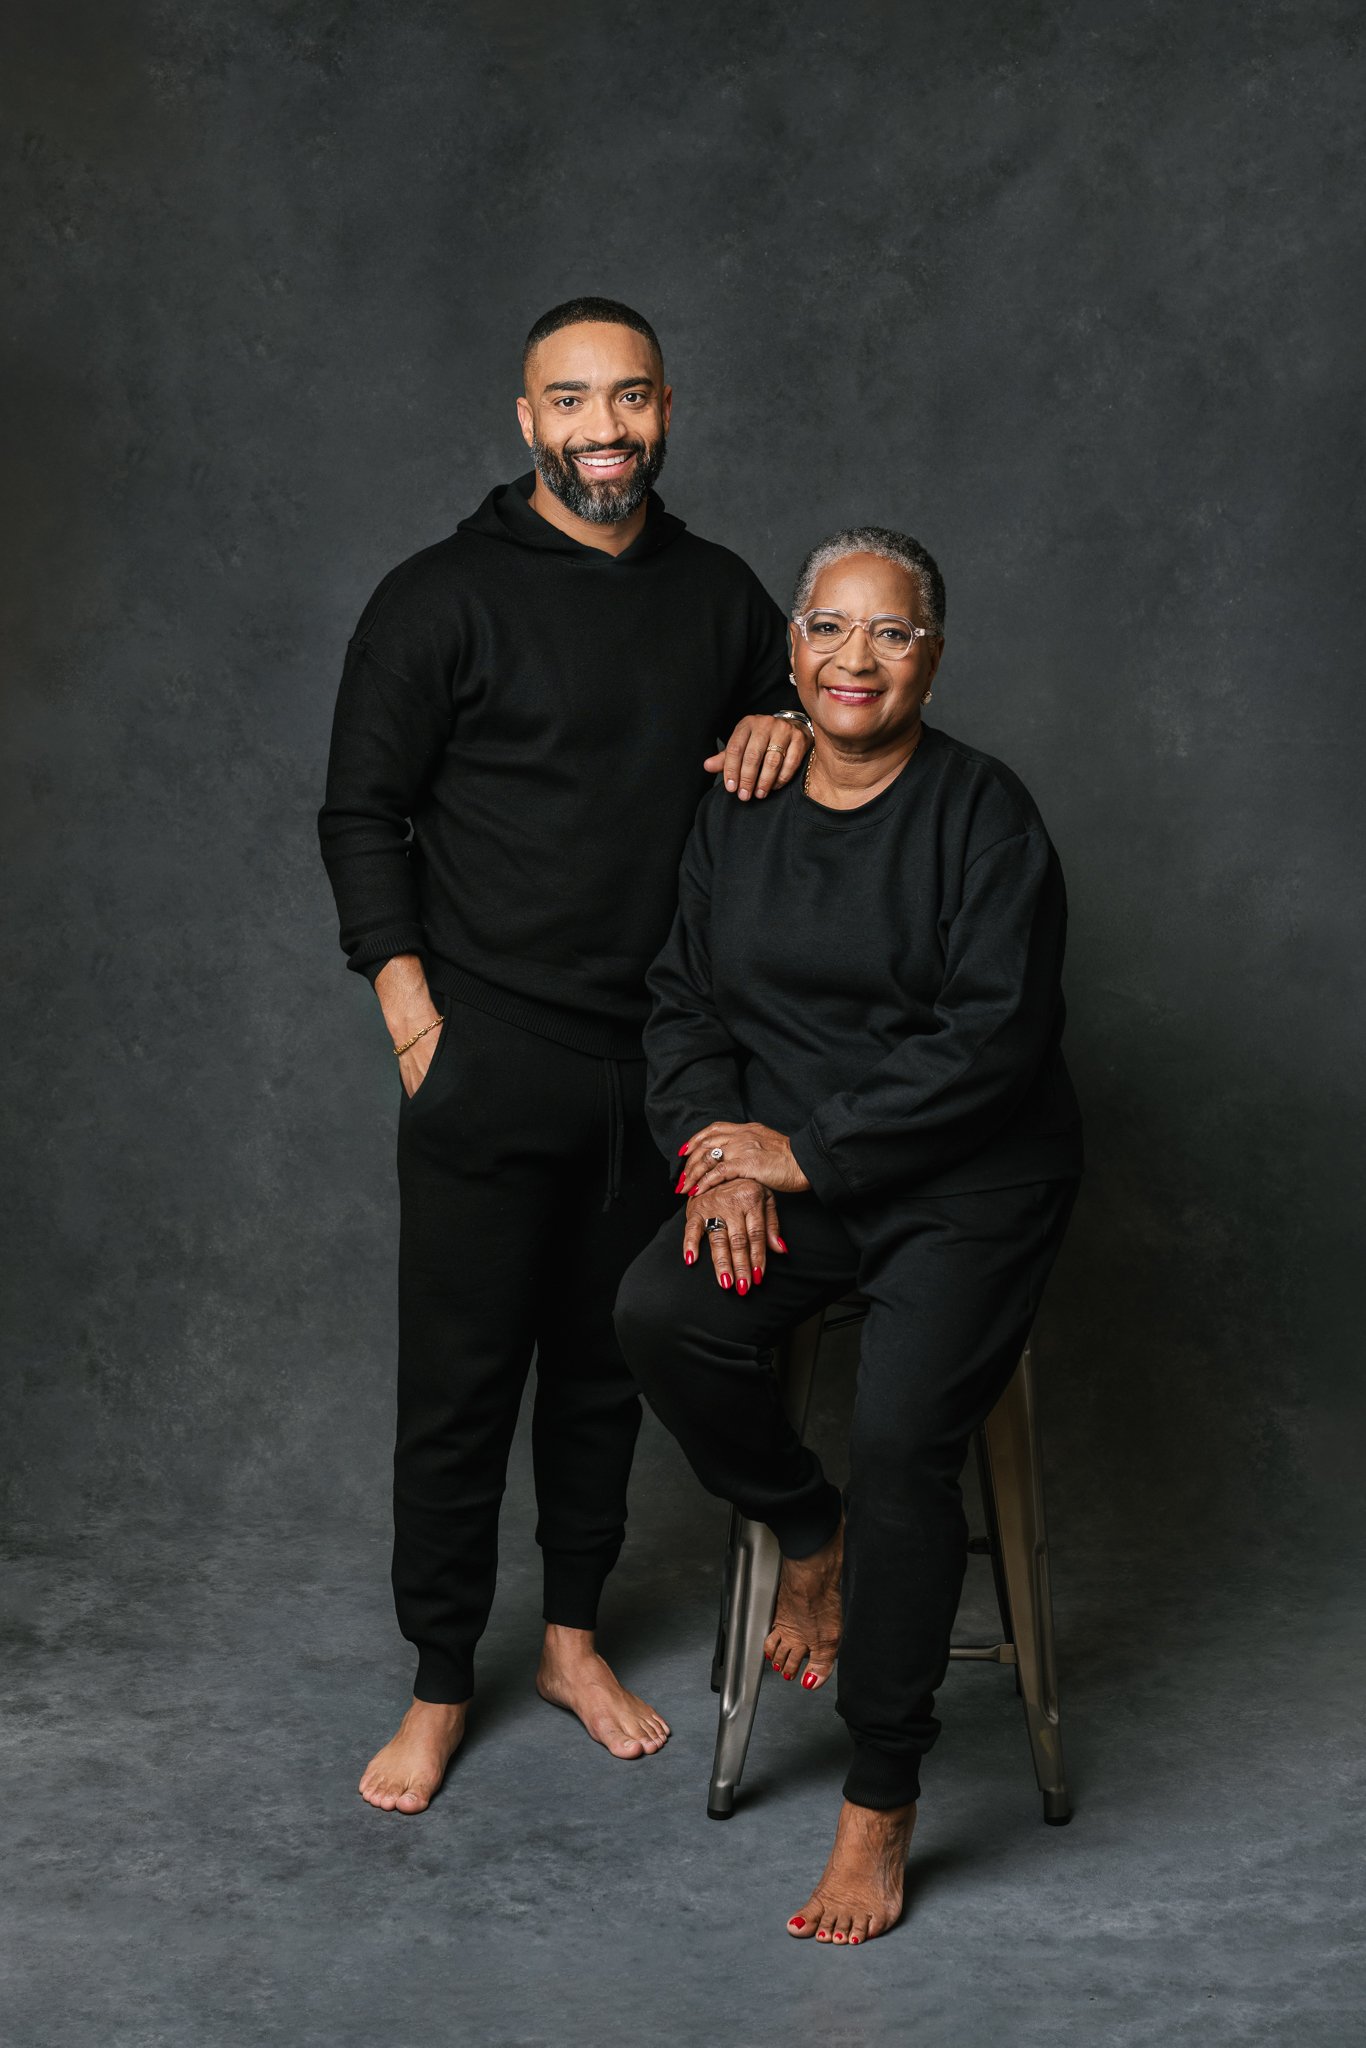  A mother and her adult son take a modern portrait at a studio with Nicole Hawkins Photography. mother son pic #NicoleHawkinsPhotograaphy #NicoleHawkinsFamilies #Modernfamilypictures #studioportraits #matchingfamilyoutfits #NJphotographer 